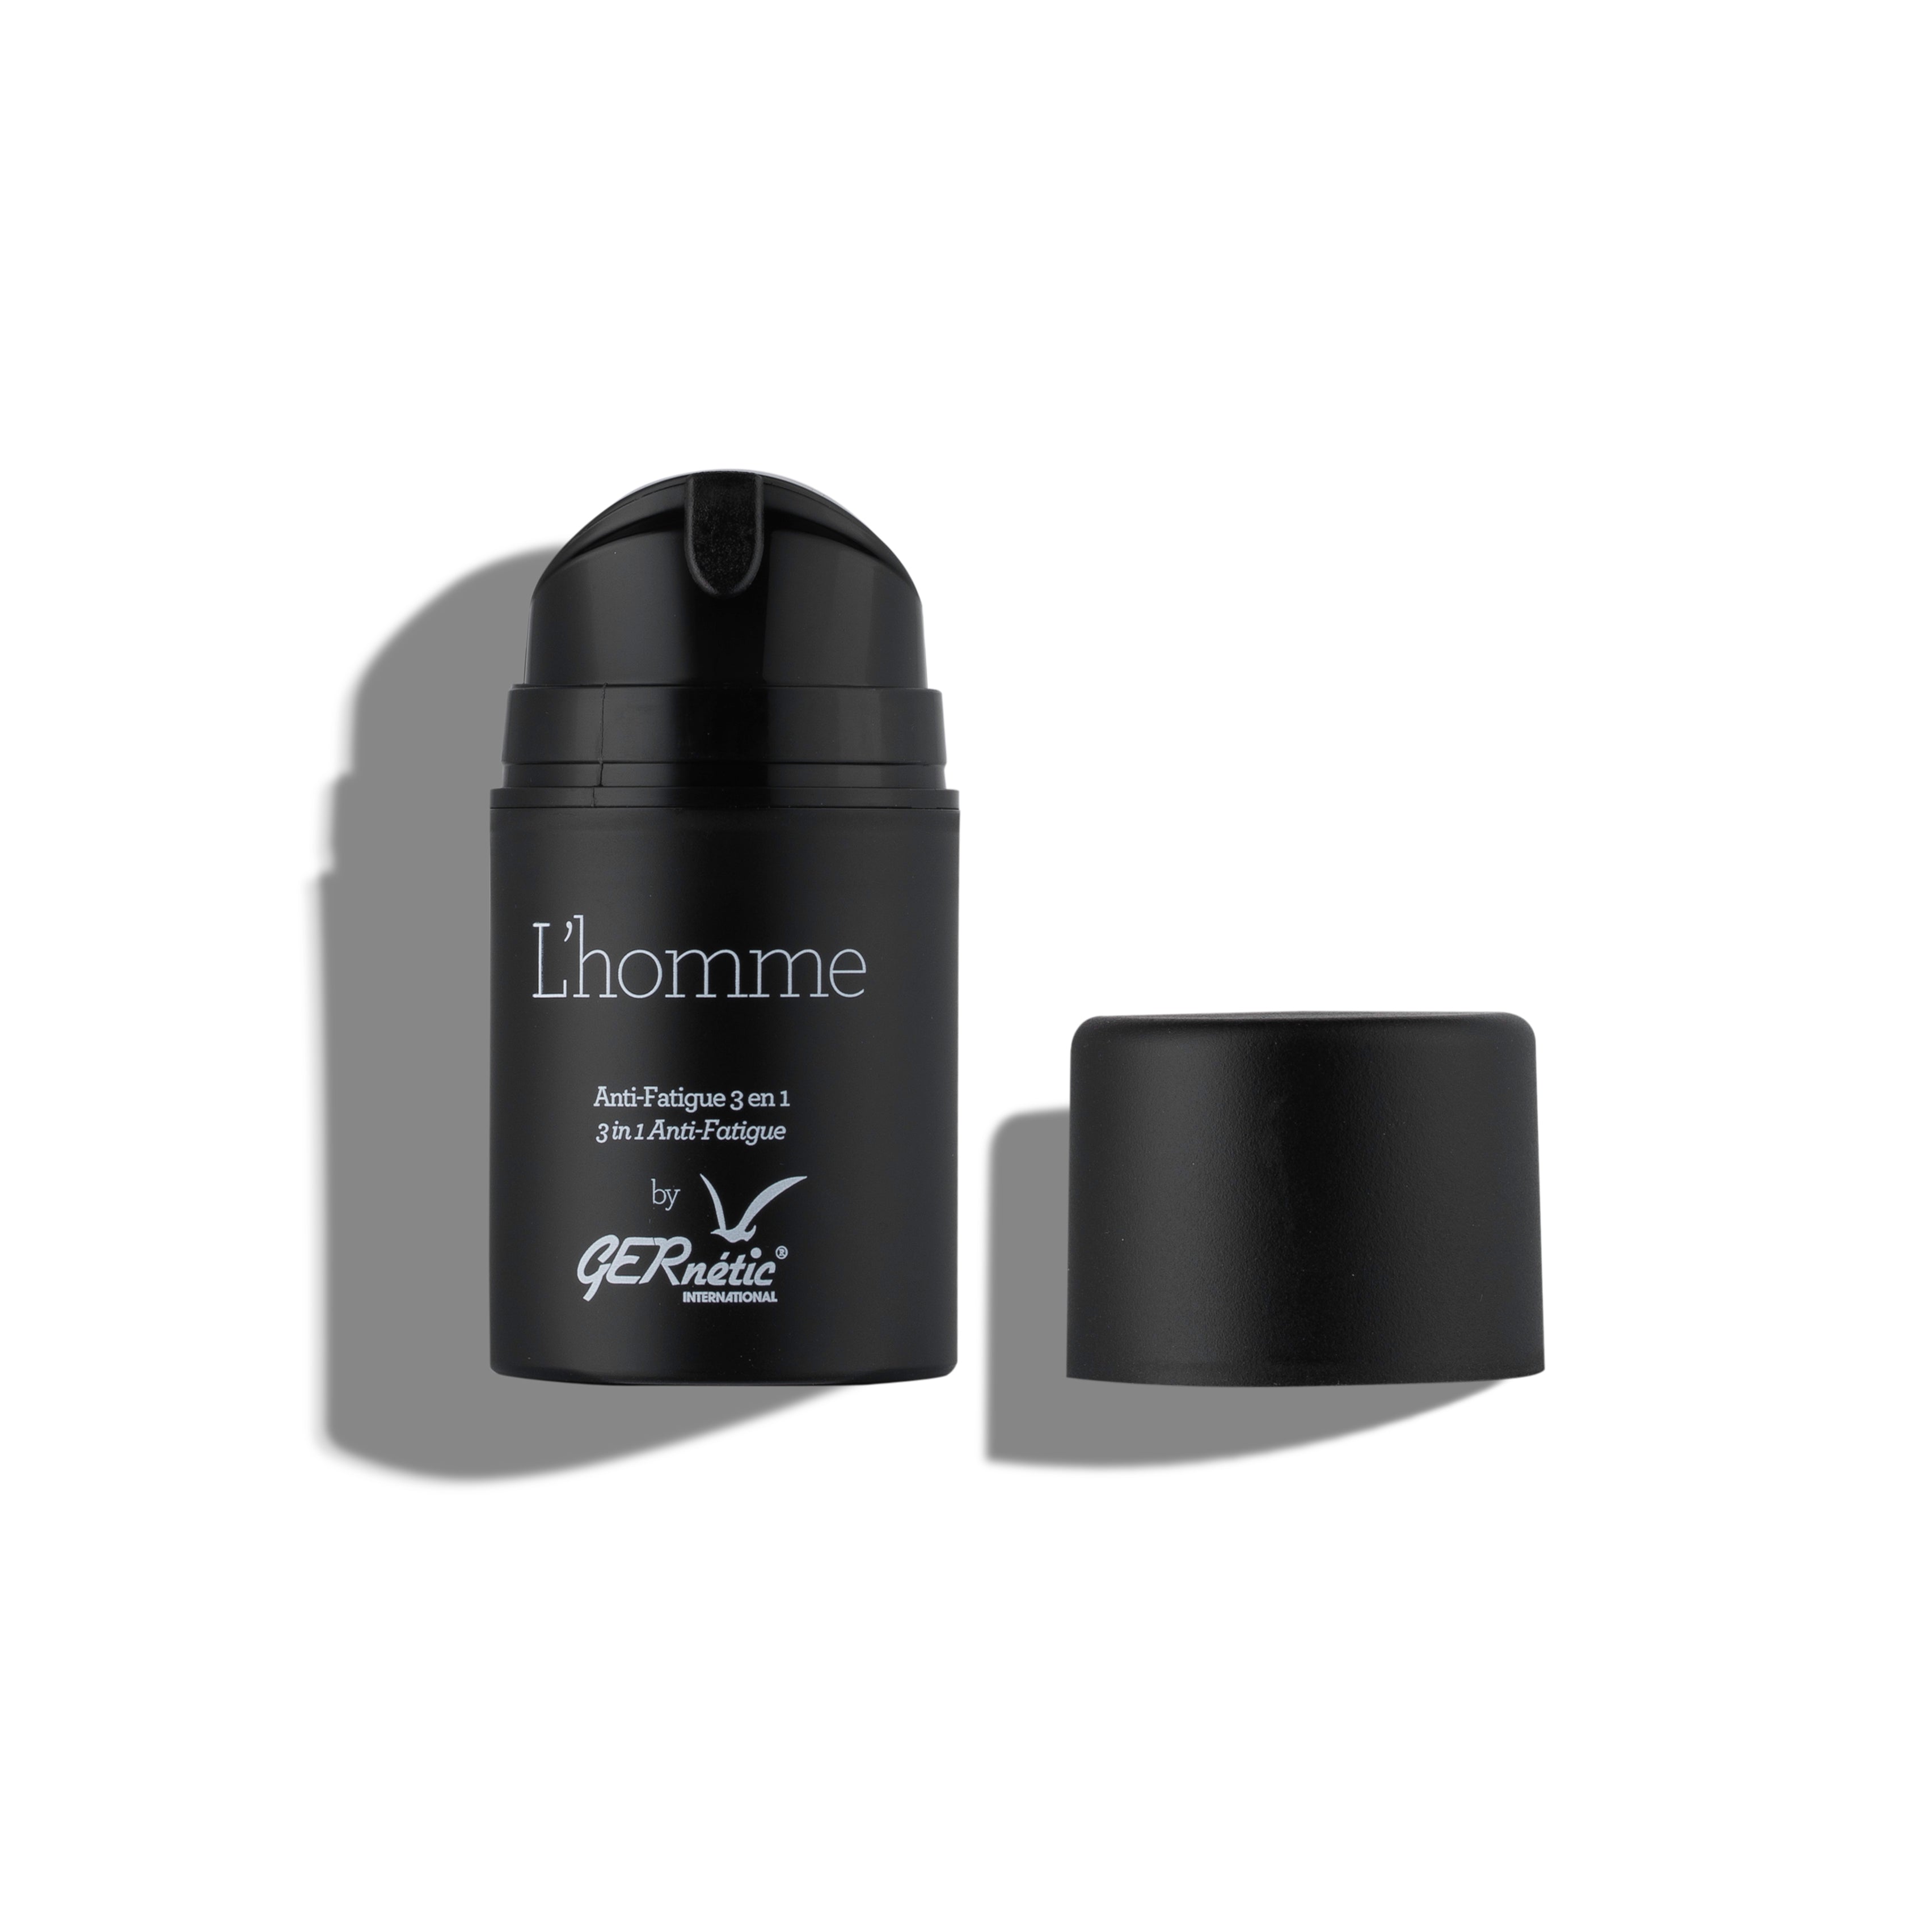 L'homme - 3 in 1 geelivoide - Vito Beauty